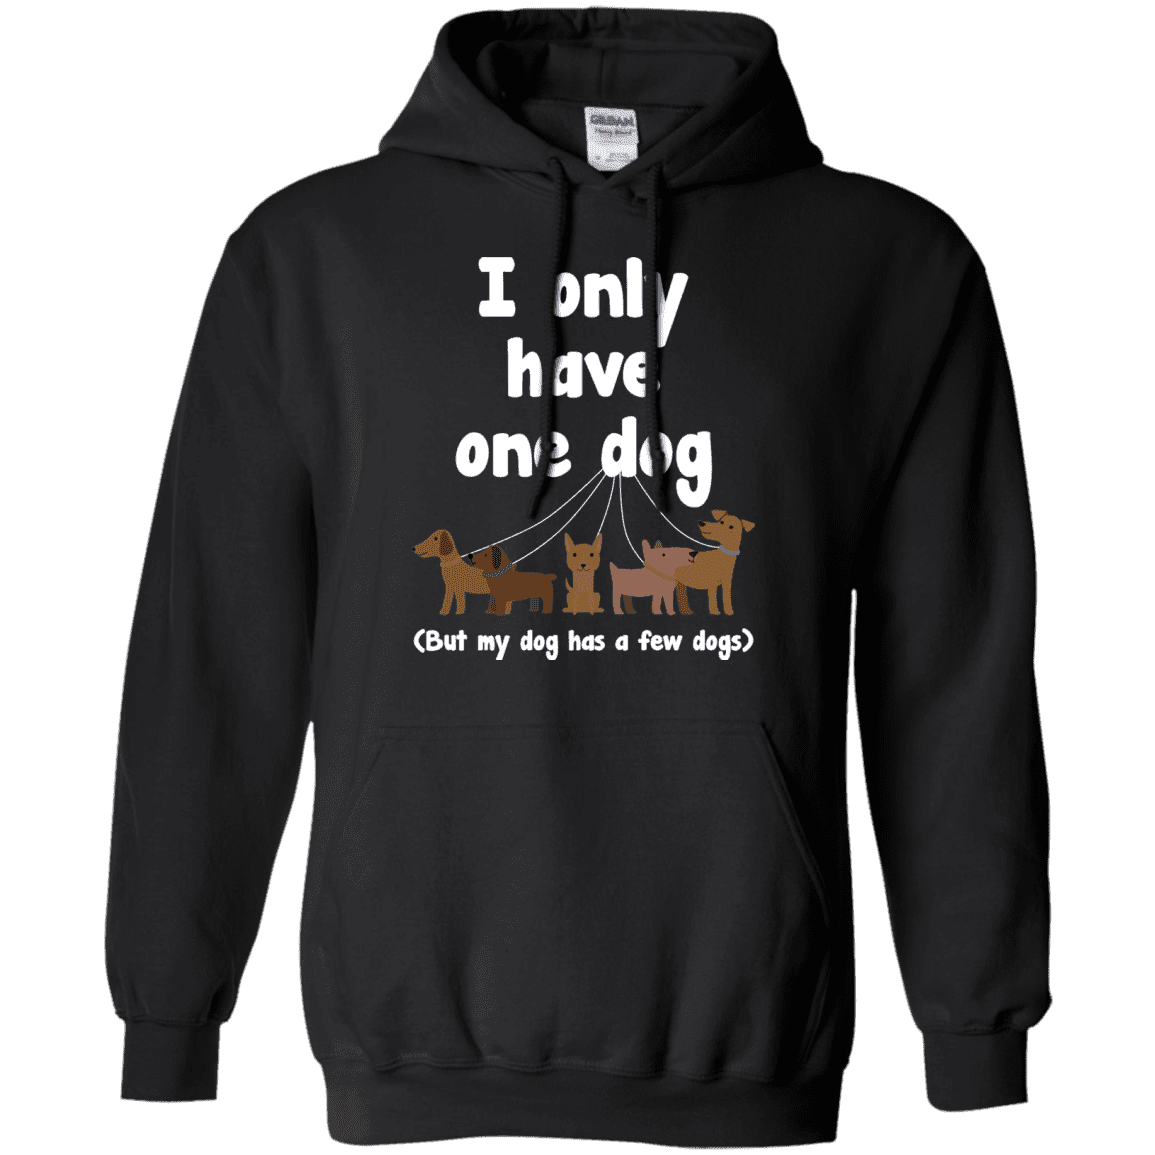 I Only Have 1 Dog - Hoodie.